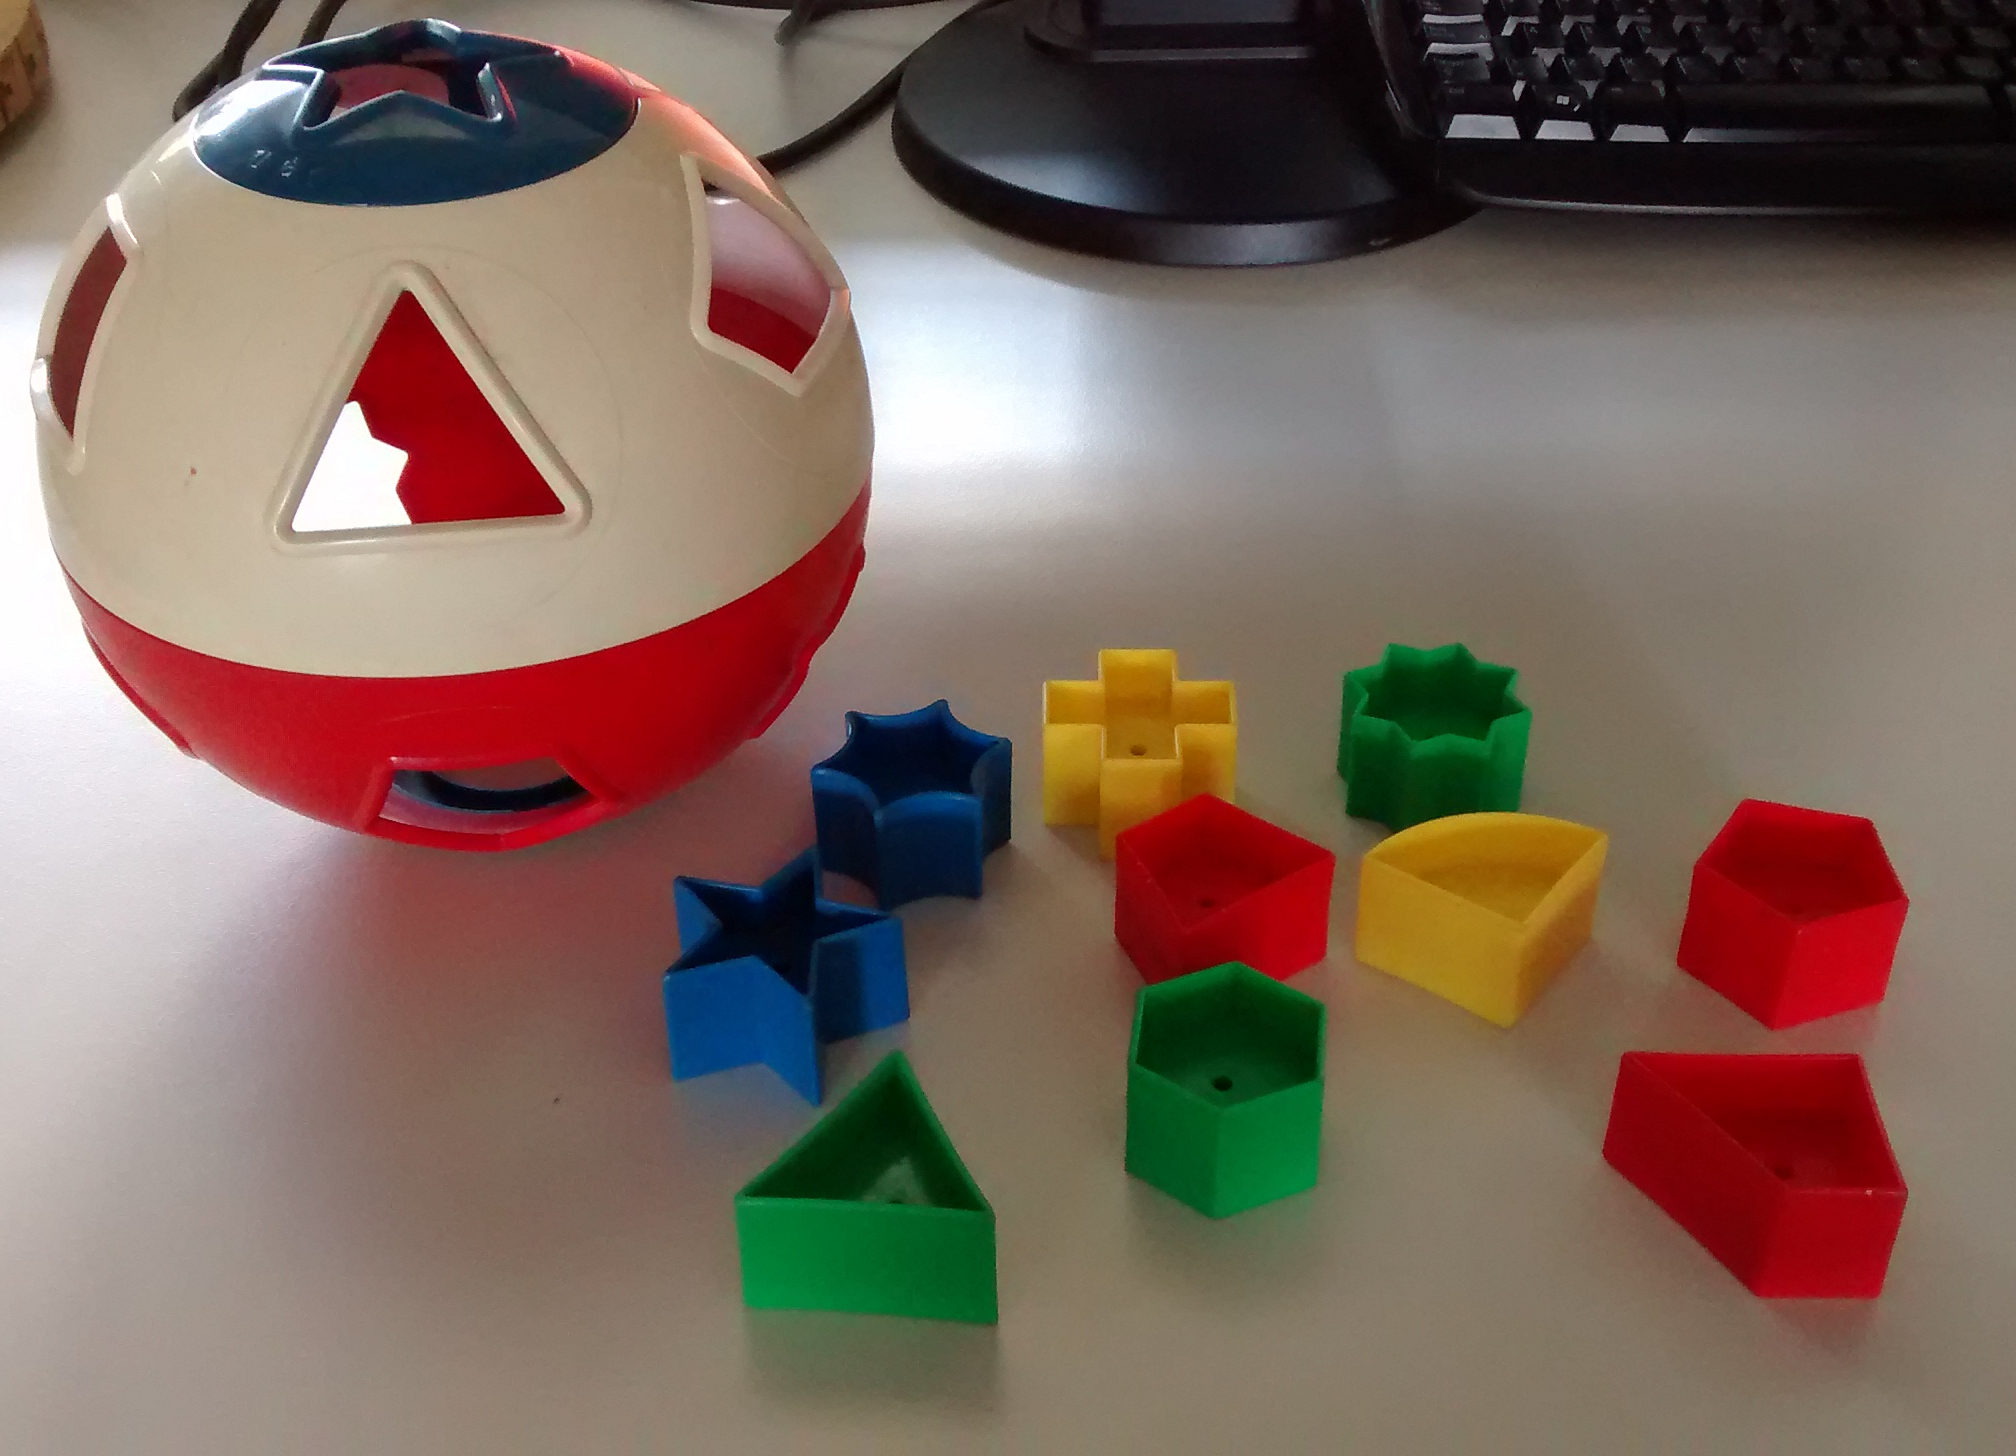 Game Kit: sphere with pieces